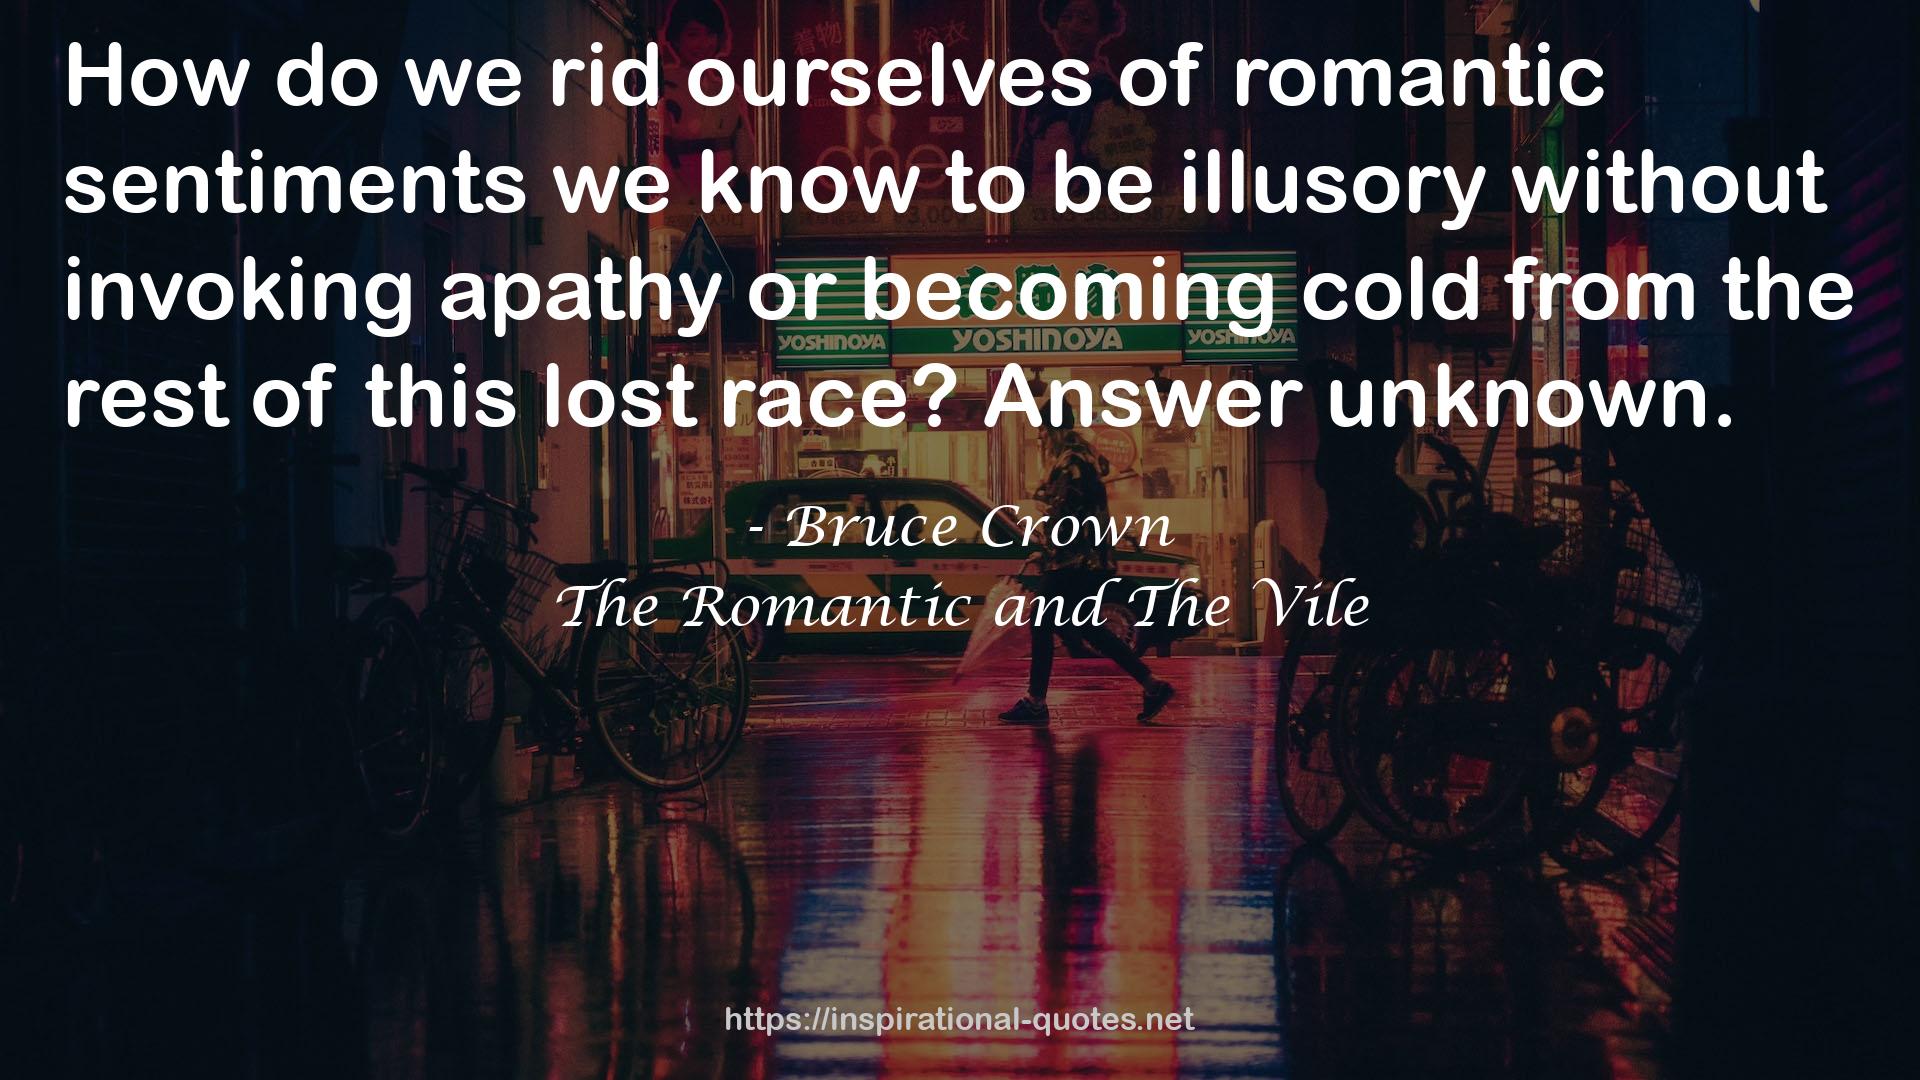 Bruce Crown QUOTES